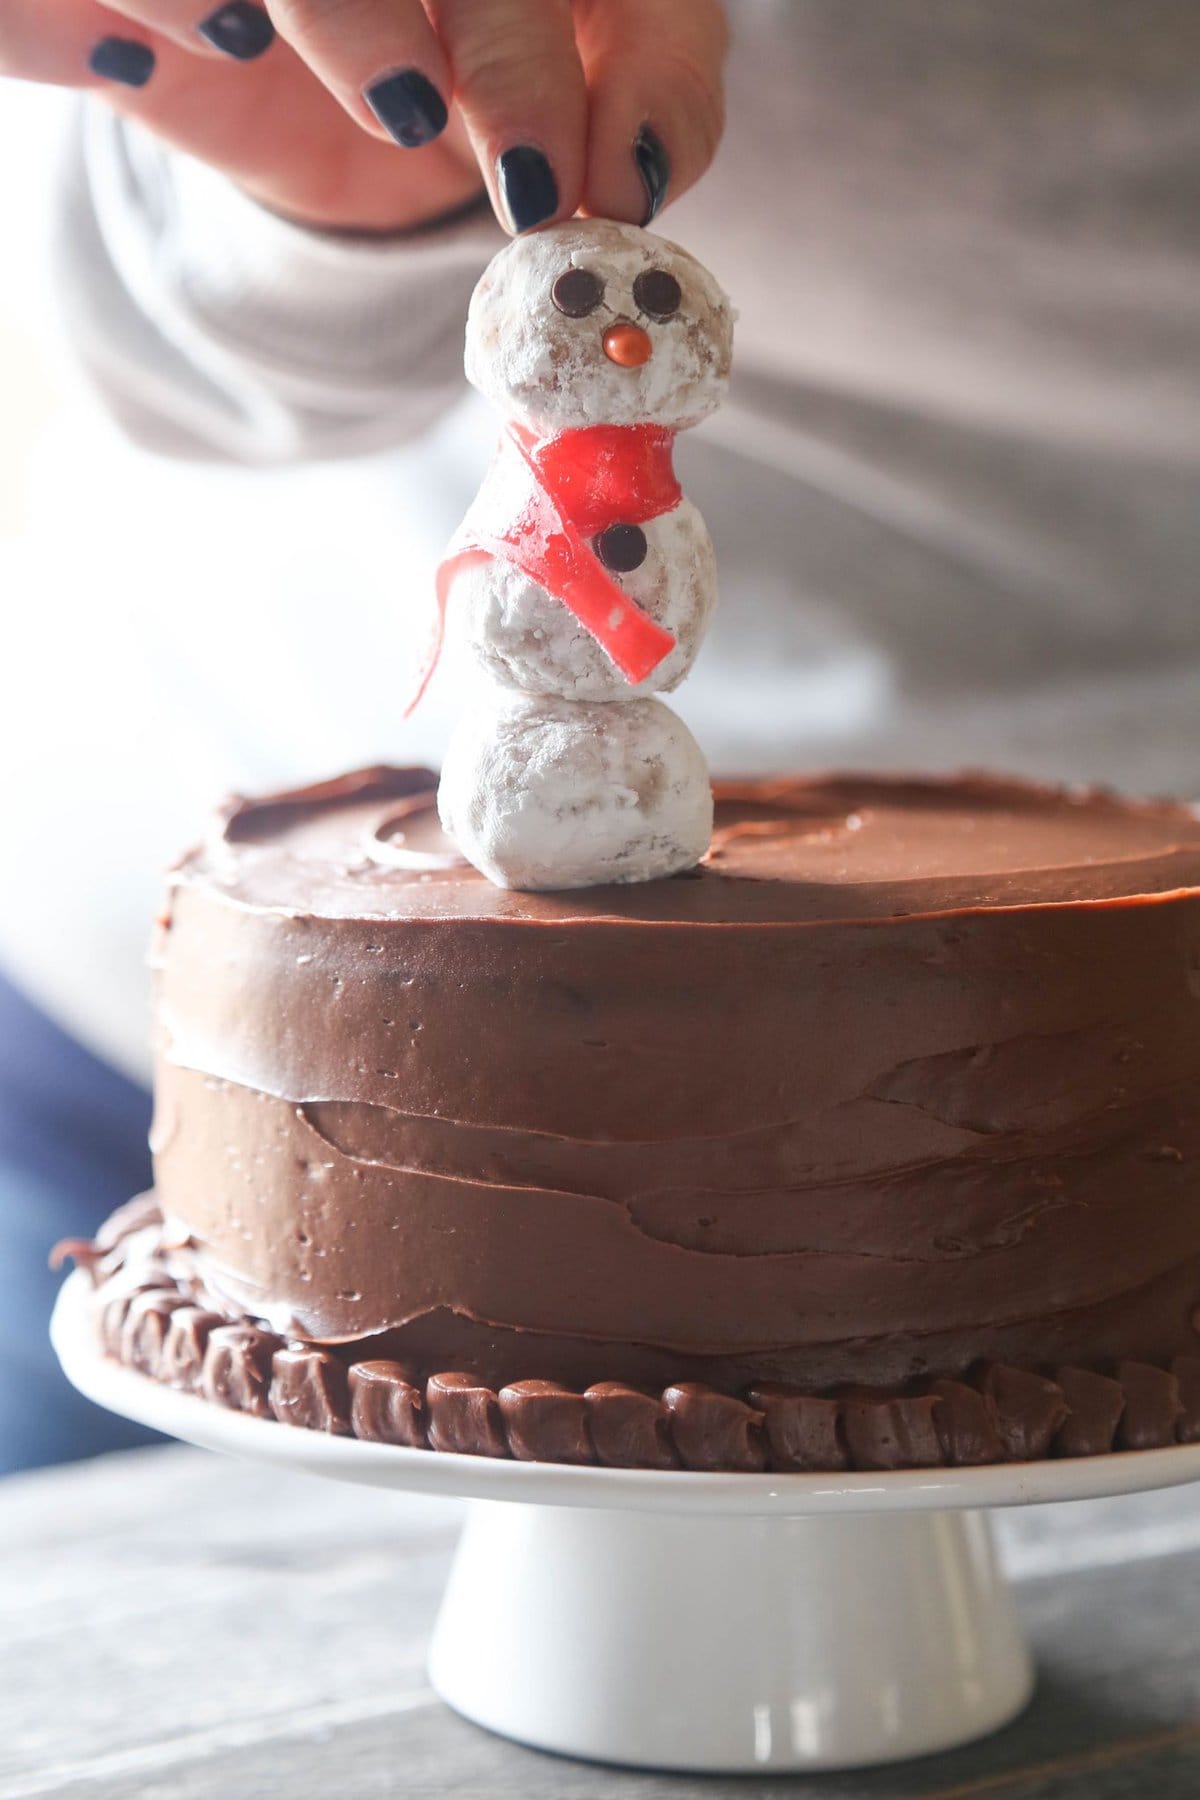 Snowman pressed into top of cake